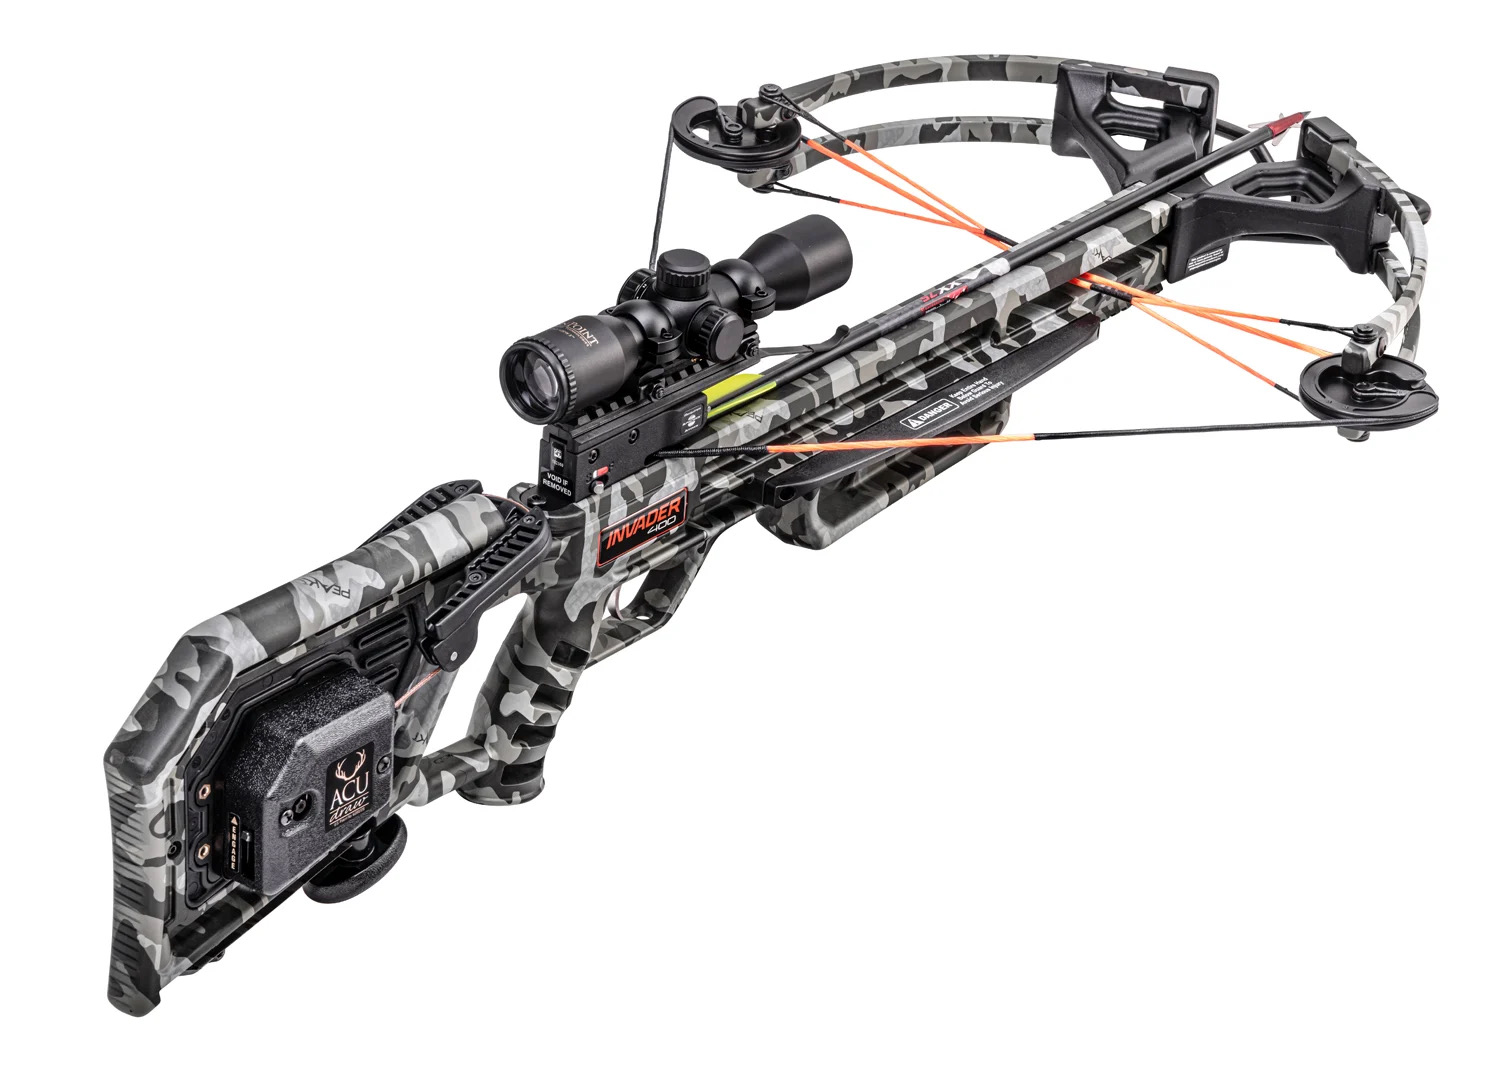 Wicked Ridge Invader 400 best crossbow for the money.